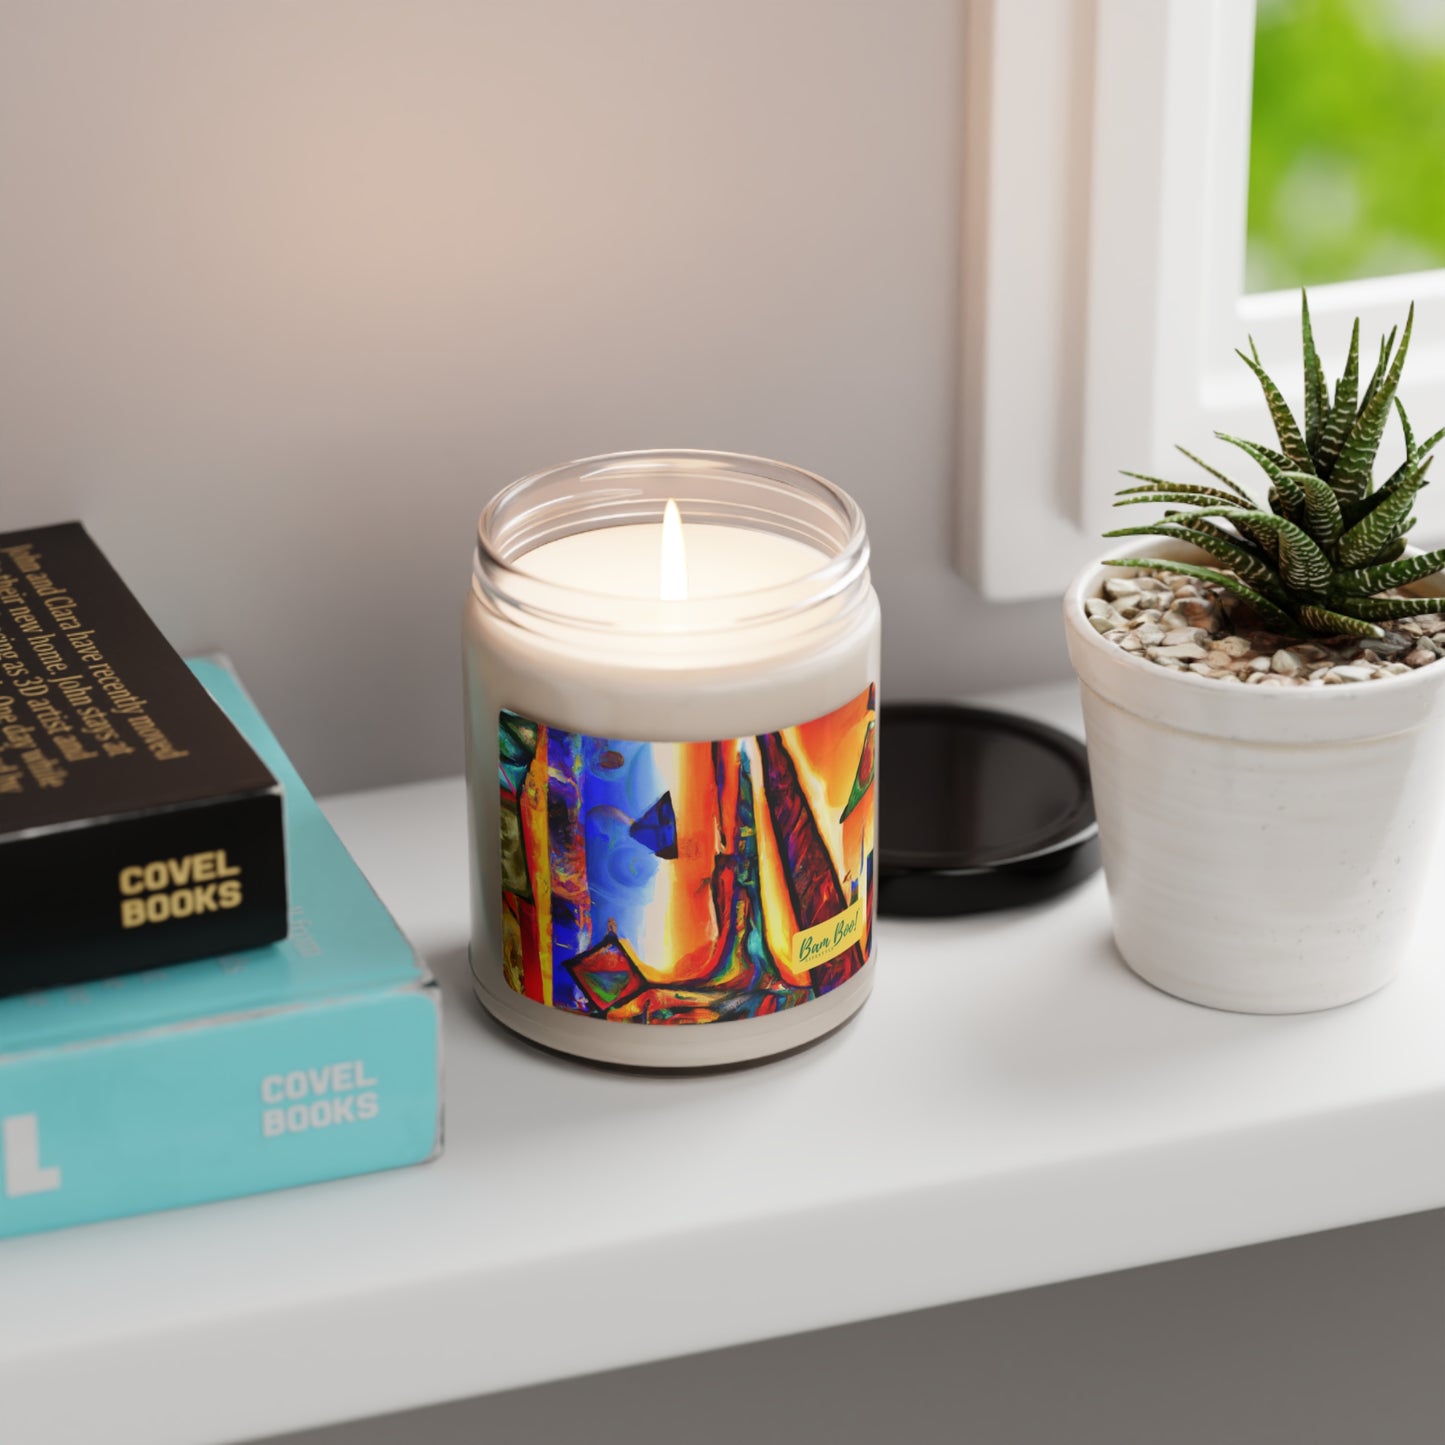 "Explorations in Artistic Hybridization" - Bam Boo! Lifestyle Eco-friendly Soy Candle